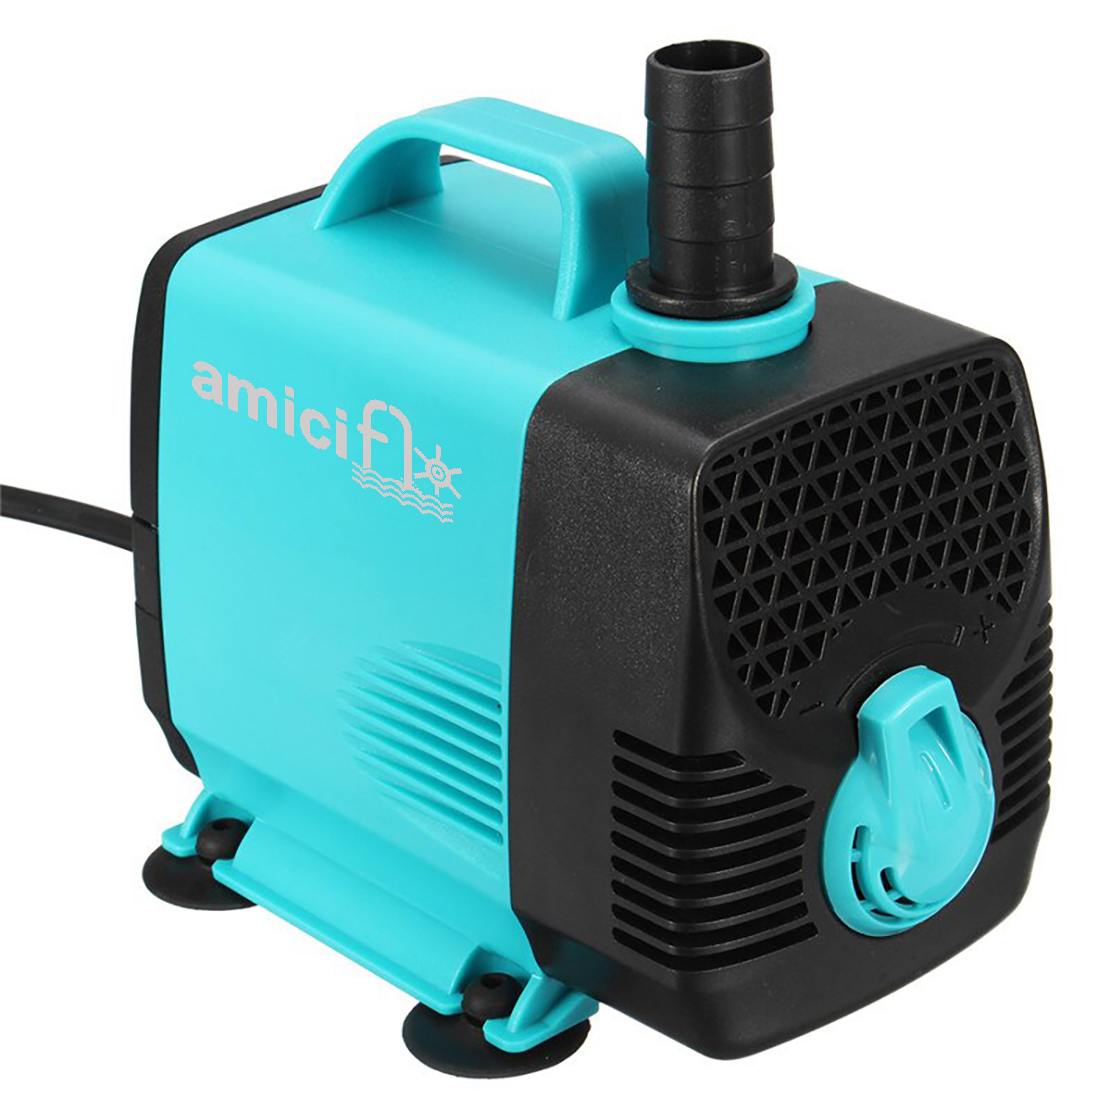 45W Submersible Pump Adjustable Flow Rate With 2 Pin Plug